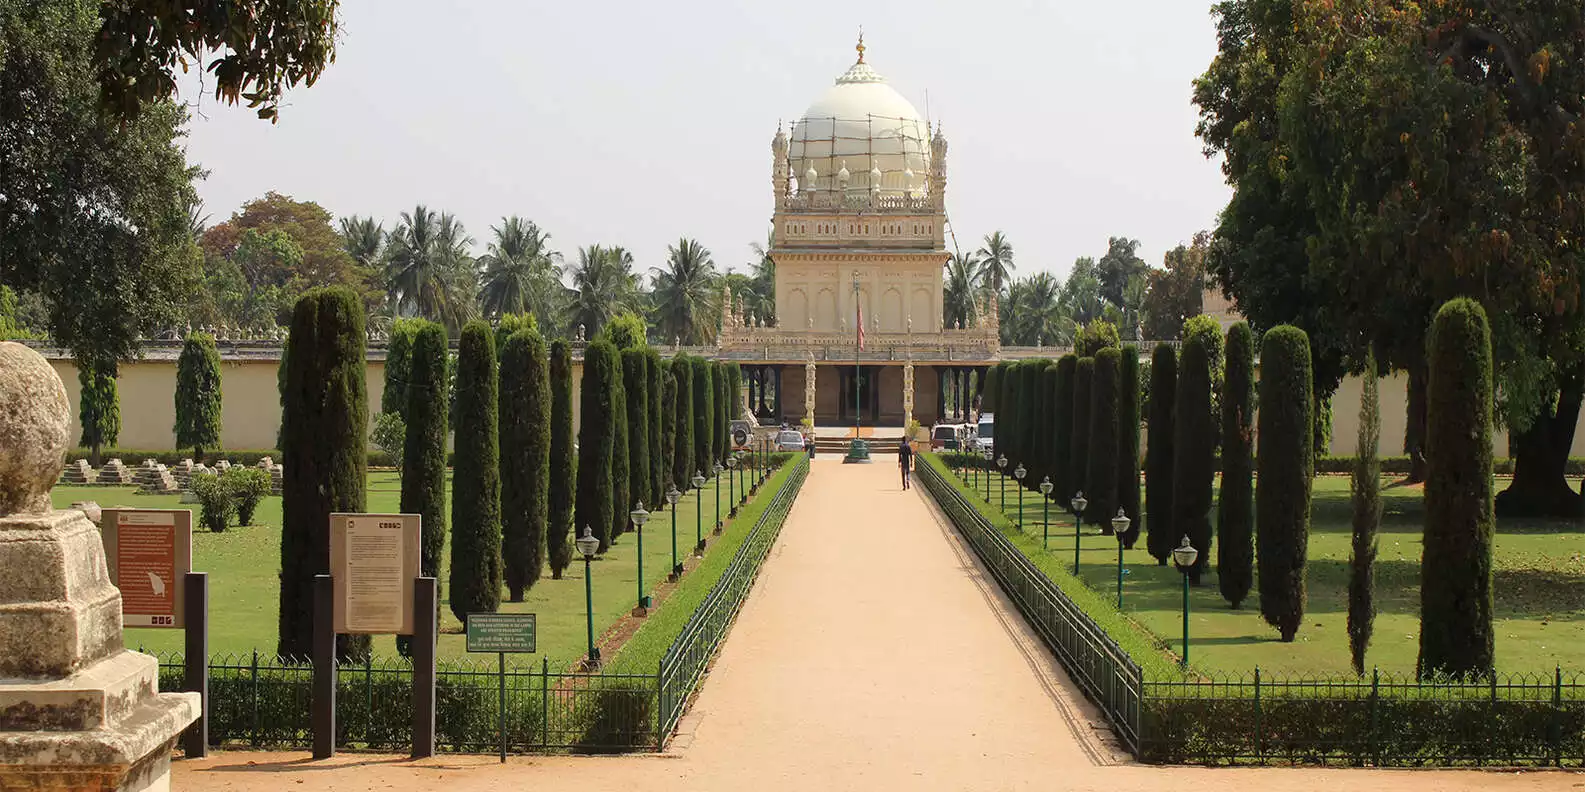 Mysore: 2-Day Palace and Gardens Tour from Bangalore | GetYourGuide